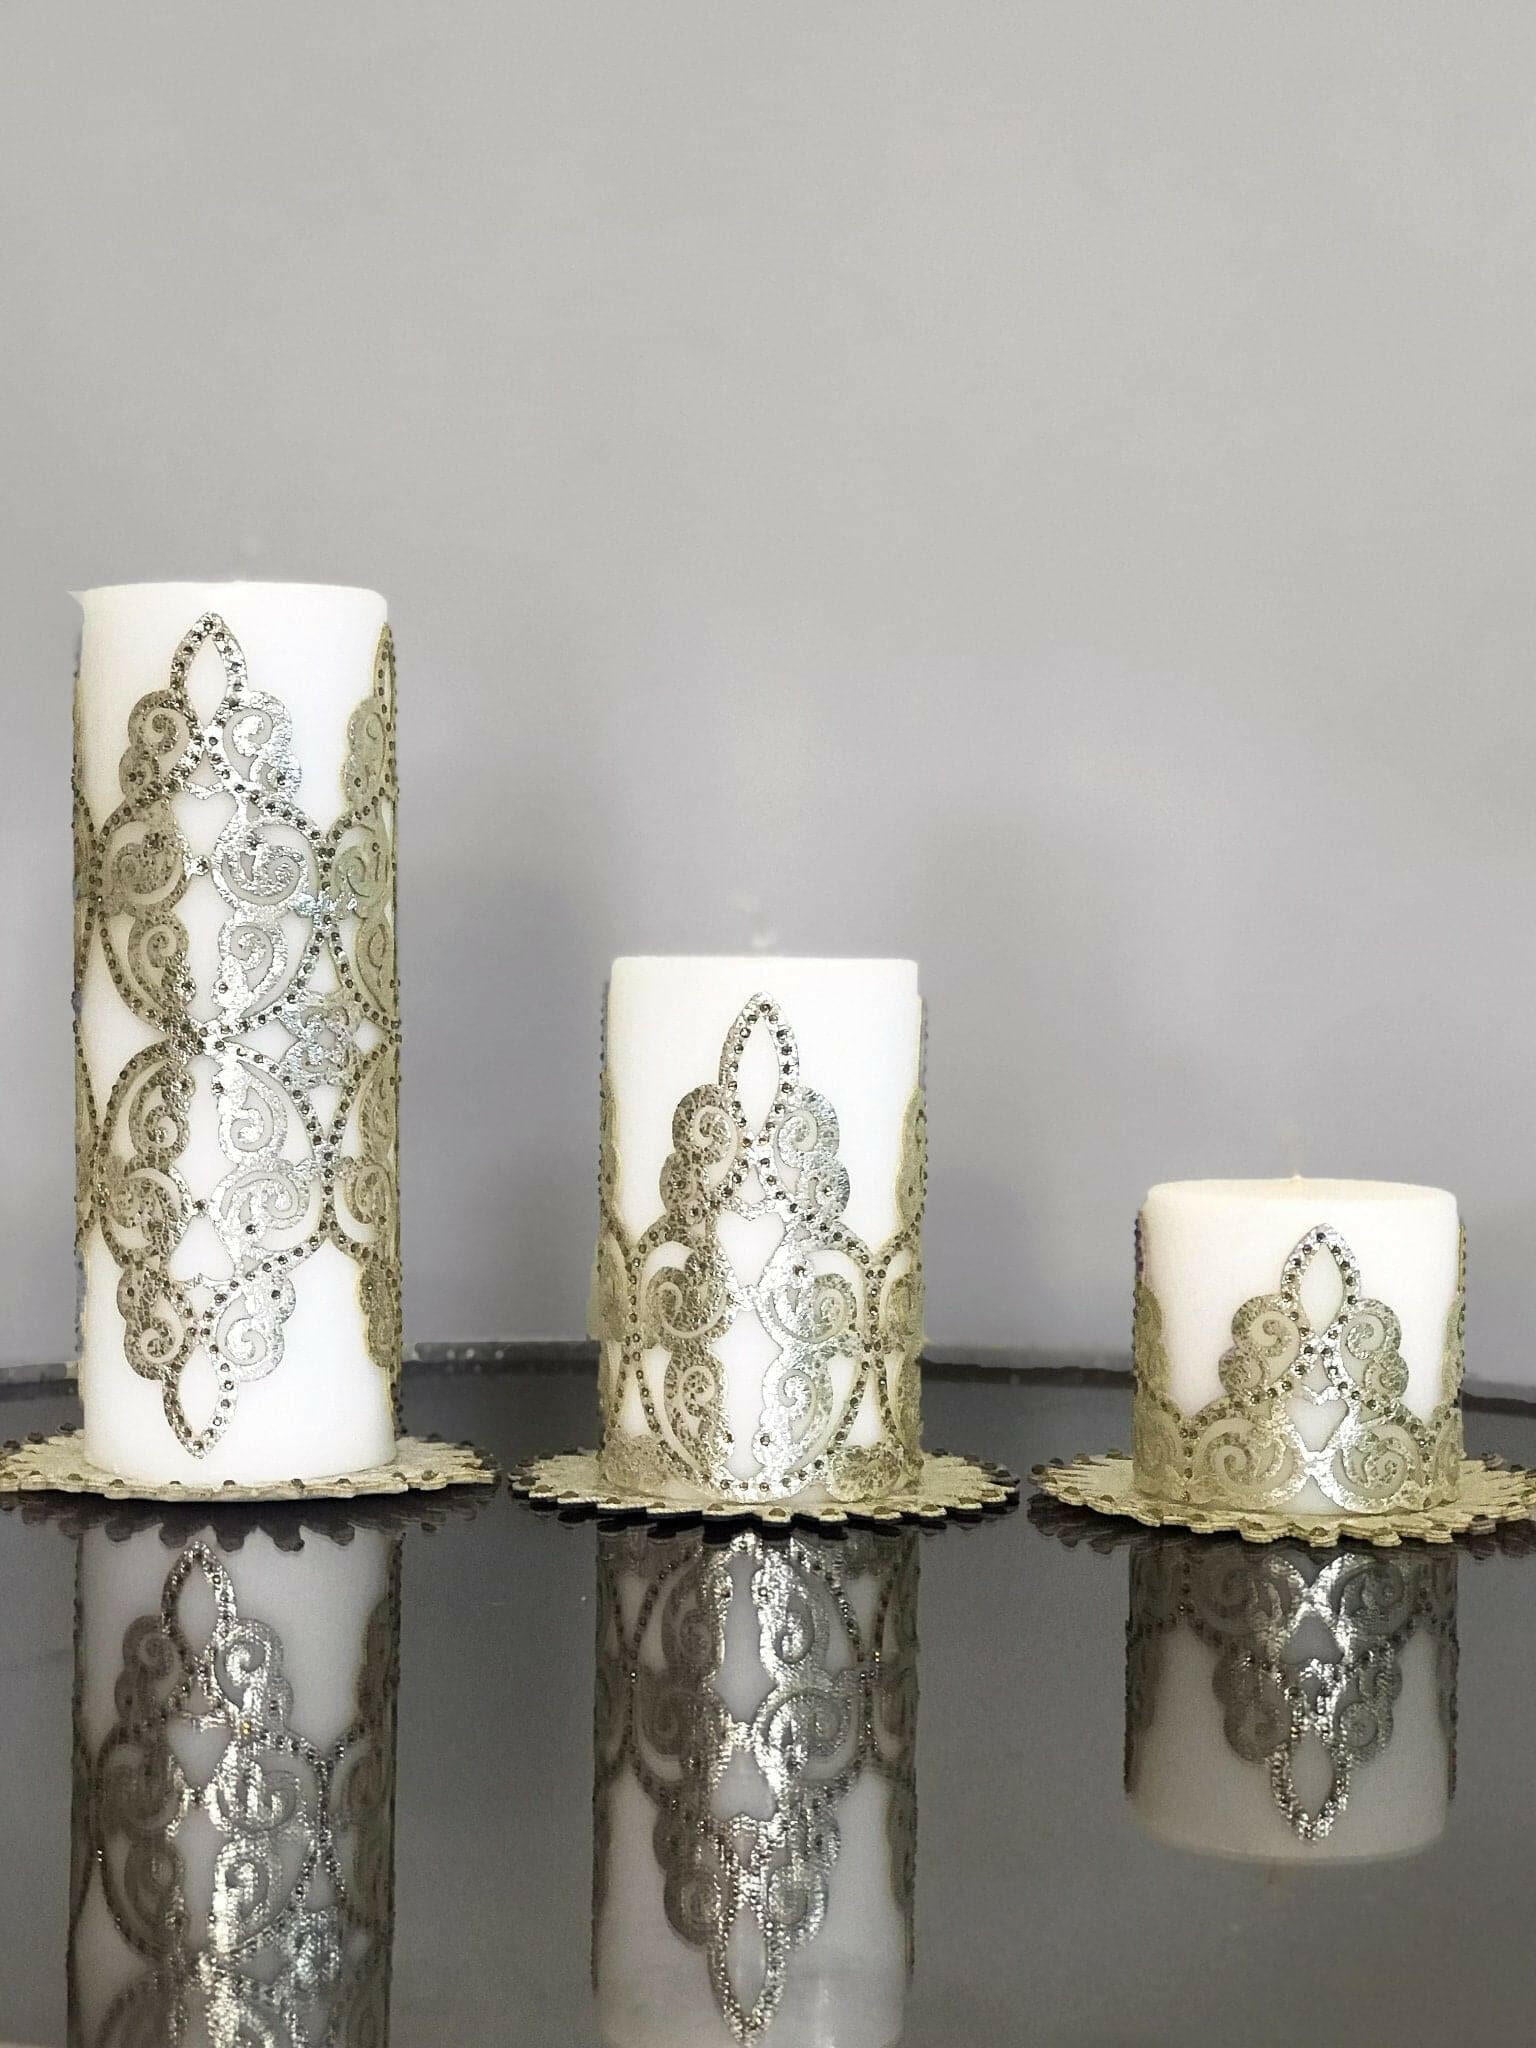 Sena Gold Leather Applied Candle Set of 3, Leather Curly Cutout Pattern Decorative Candles by Creative Home